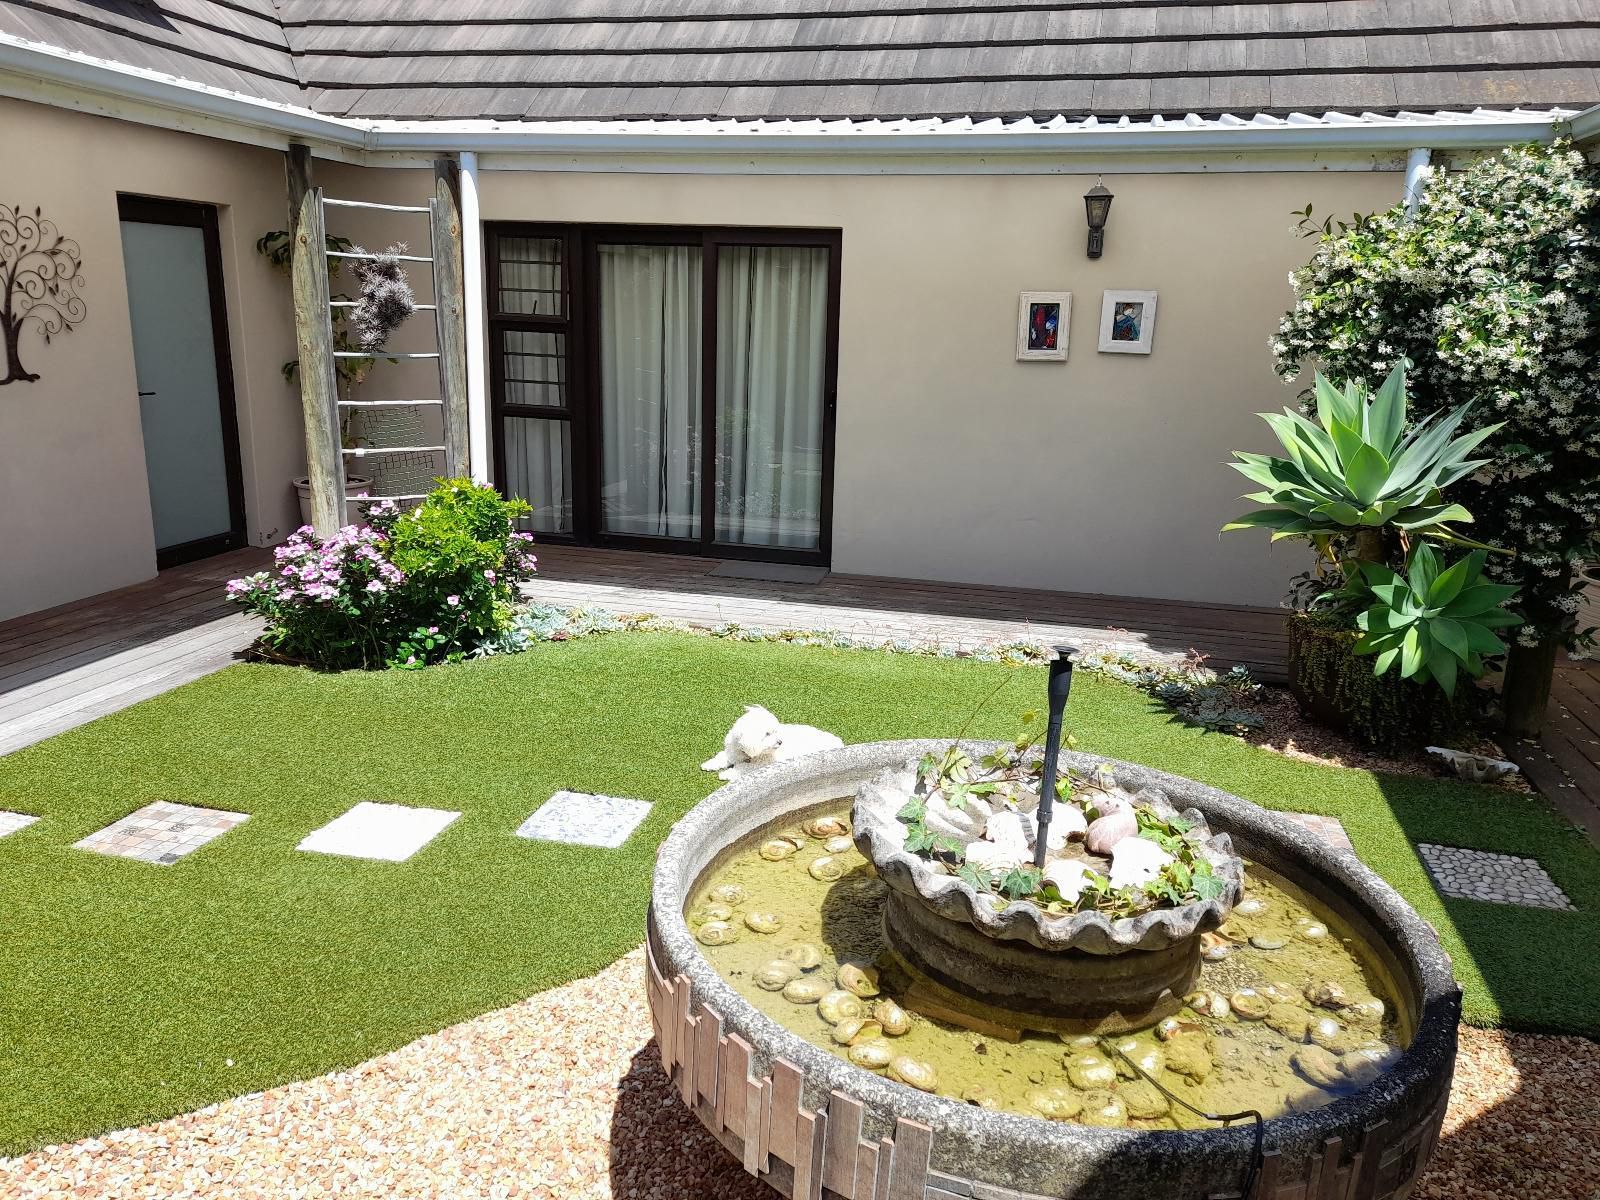 Barnard Self Catering Apartments St Francis Bay Eastern Cape South Africa Cake, Bakery Product, Food, House, Building, Architecture, Plant, Nature, Garden, Swimming Pool